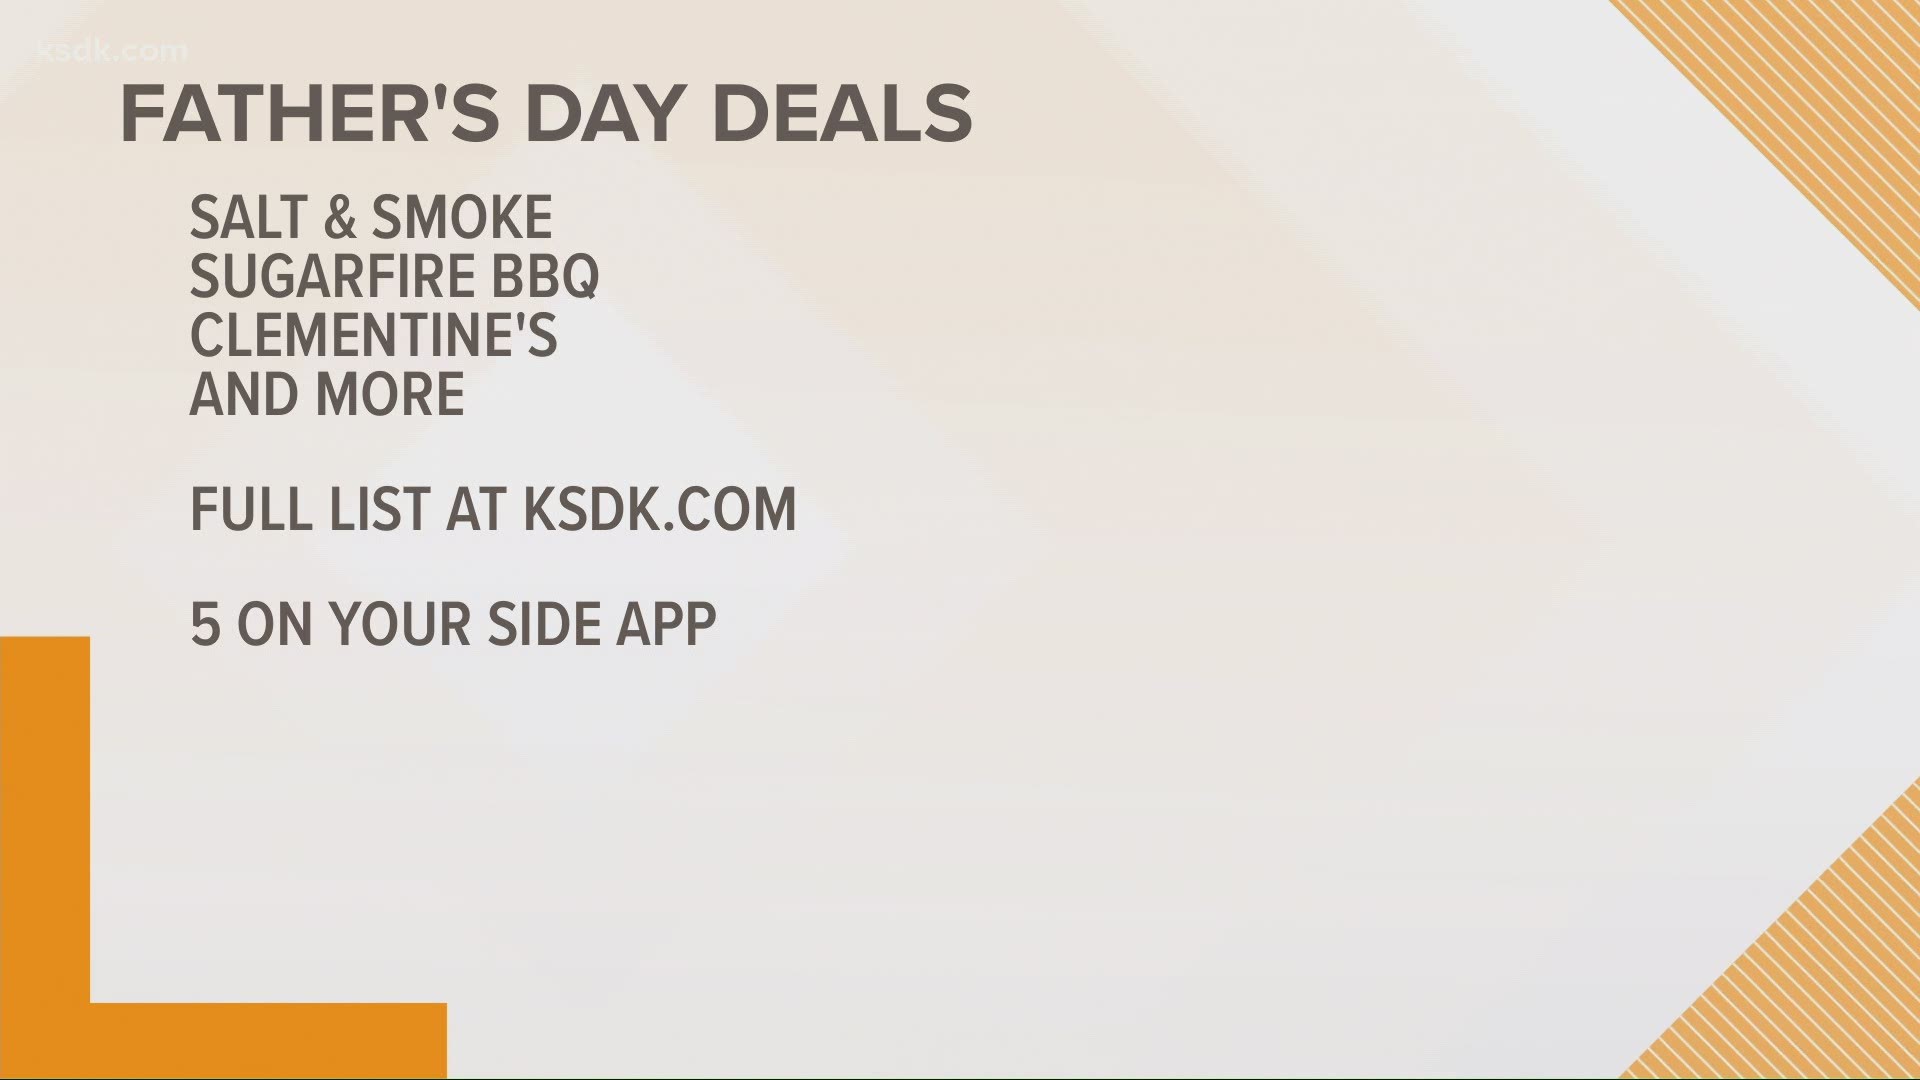 Father’s Day is this Sunday and several restaurants around the St. Louis area are celebrating with deals and specials.